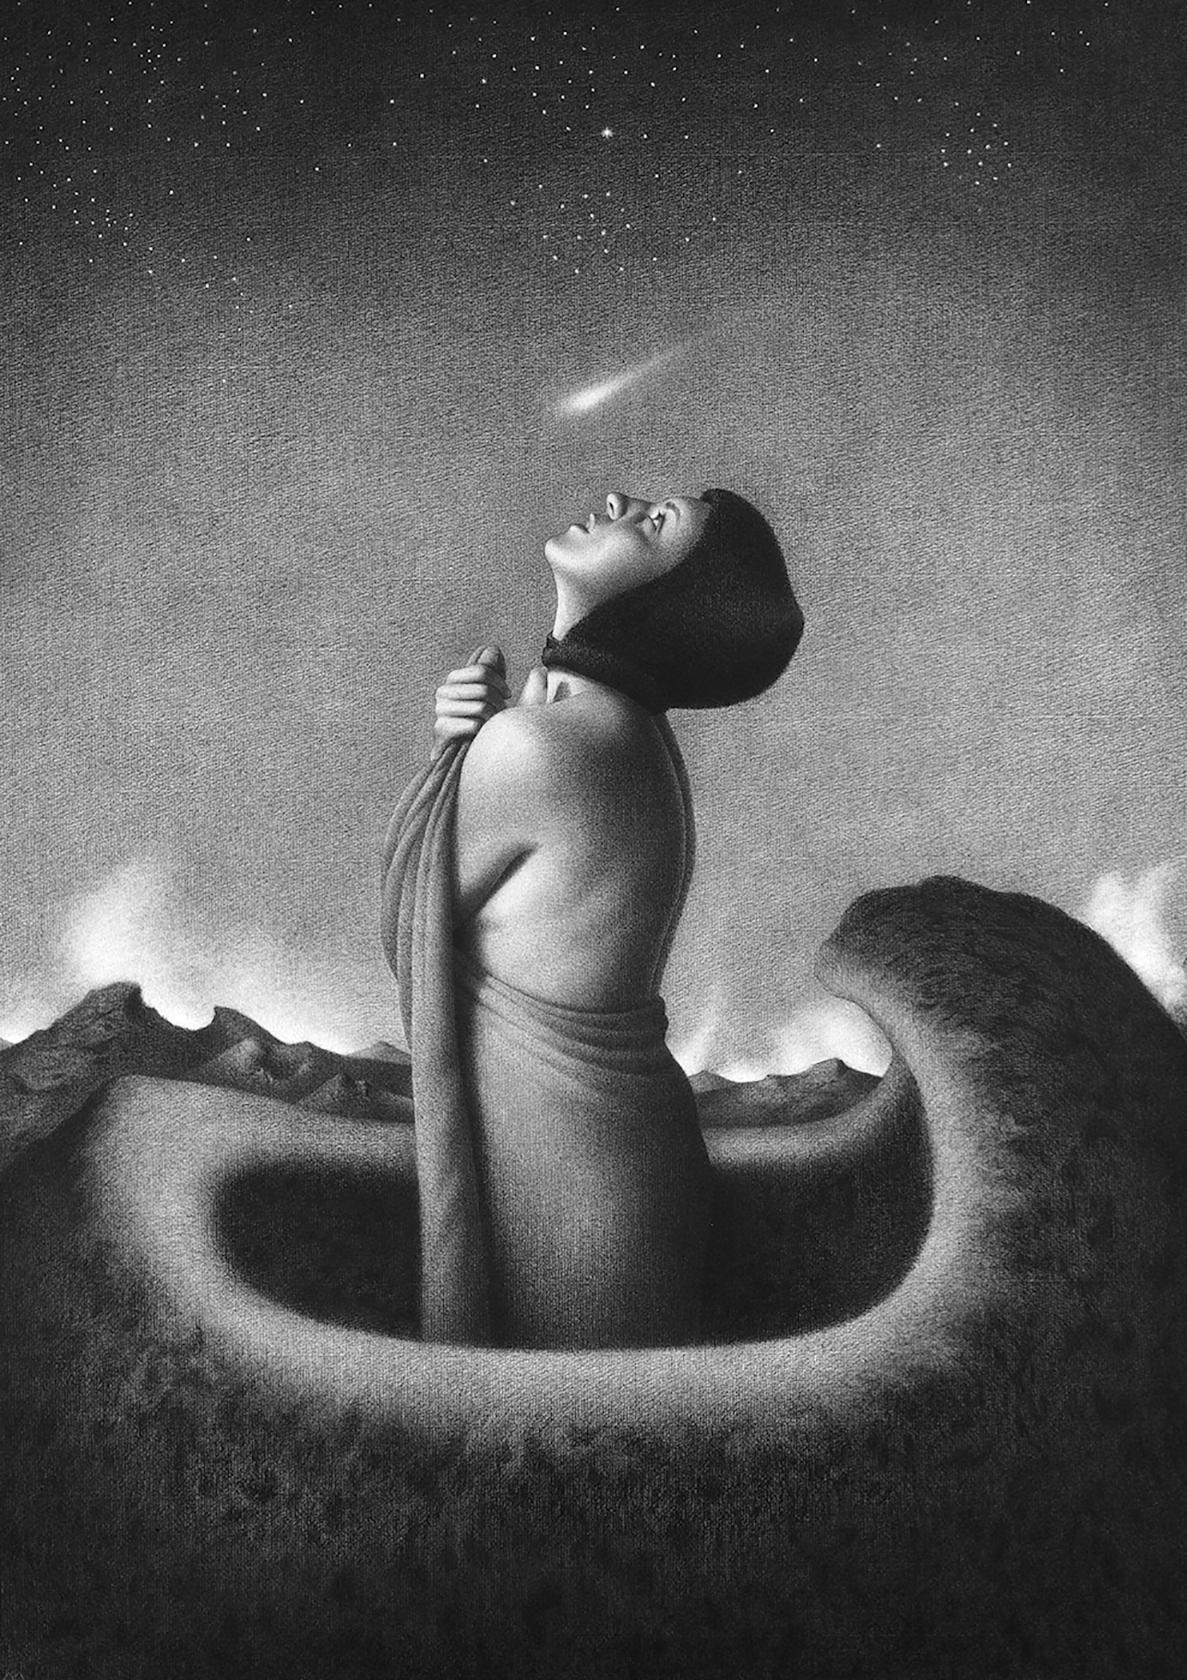  "Falling Star" by Carlos Madrid. Charcoal and white chalk on paper, 46 inches by 32 inches. (Courtesy of Carlos Madrid)